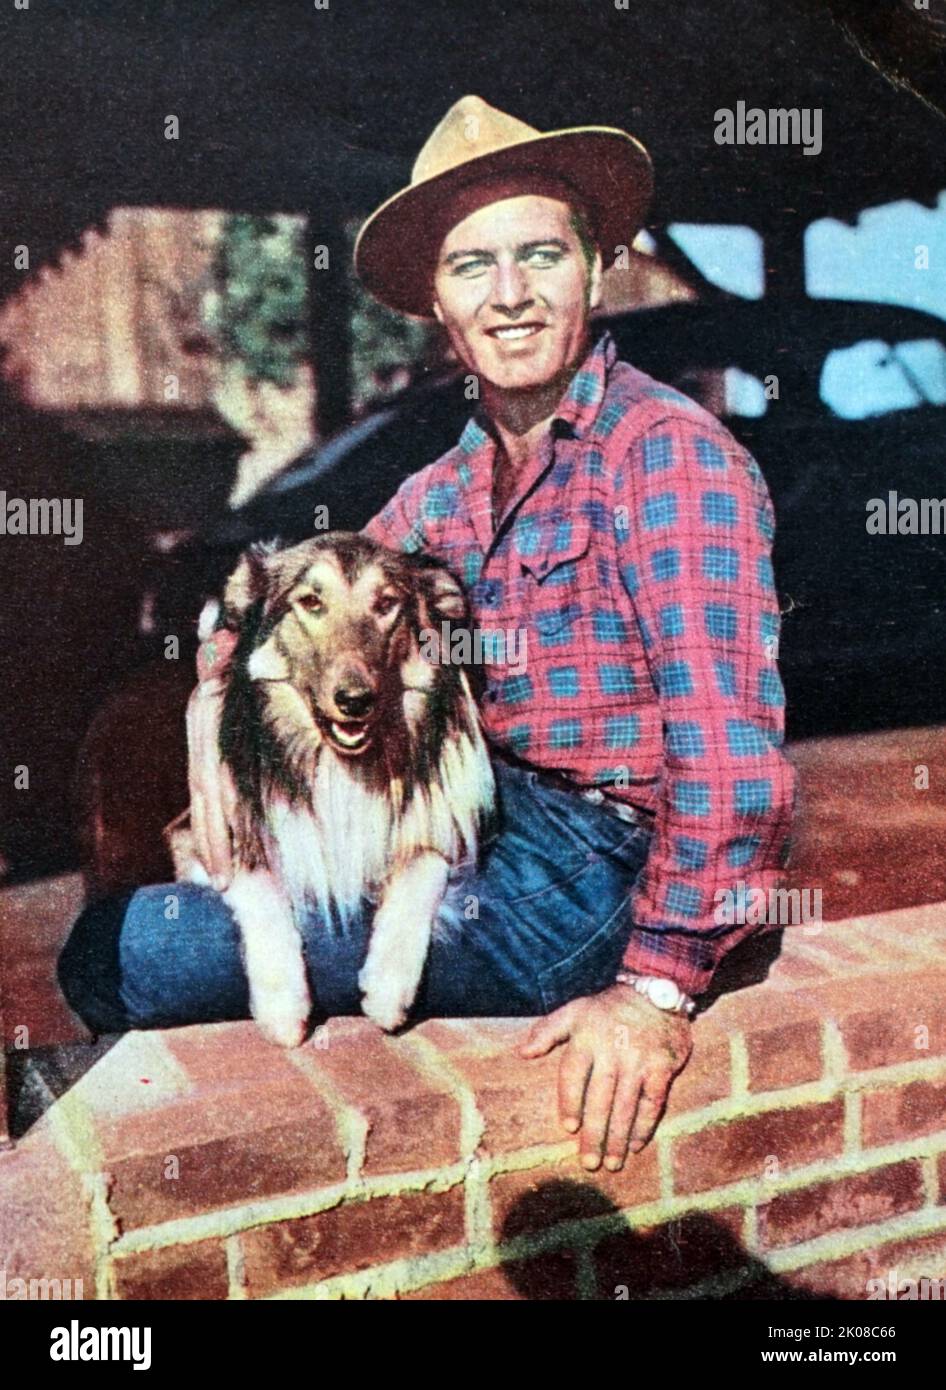 George Montgomery (born George Montgomery Letz; August 27, 1916 - December 12, 2000) was an American actor, best known for his work in Western films and television. He was also a painter, director, producer, writer, sculptor, furniture craftsman, and stuntman Stock Photo